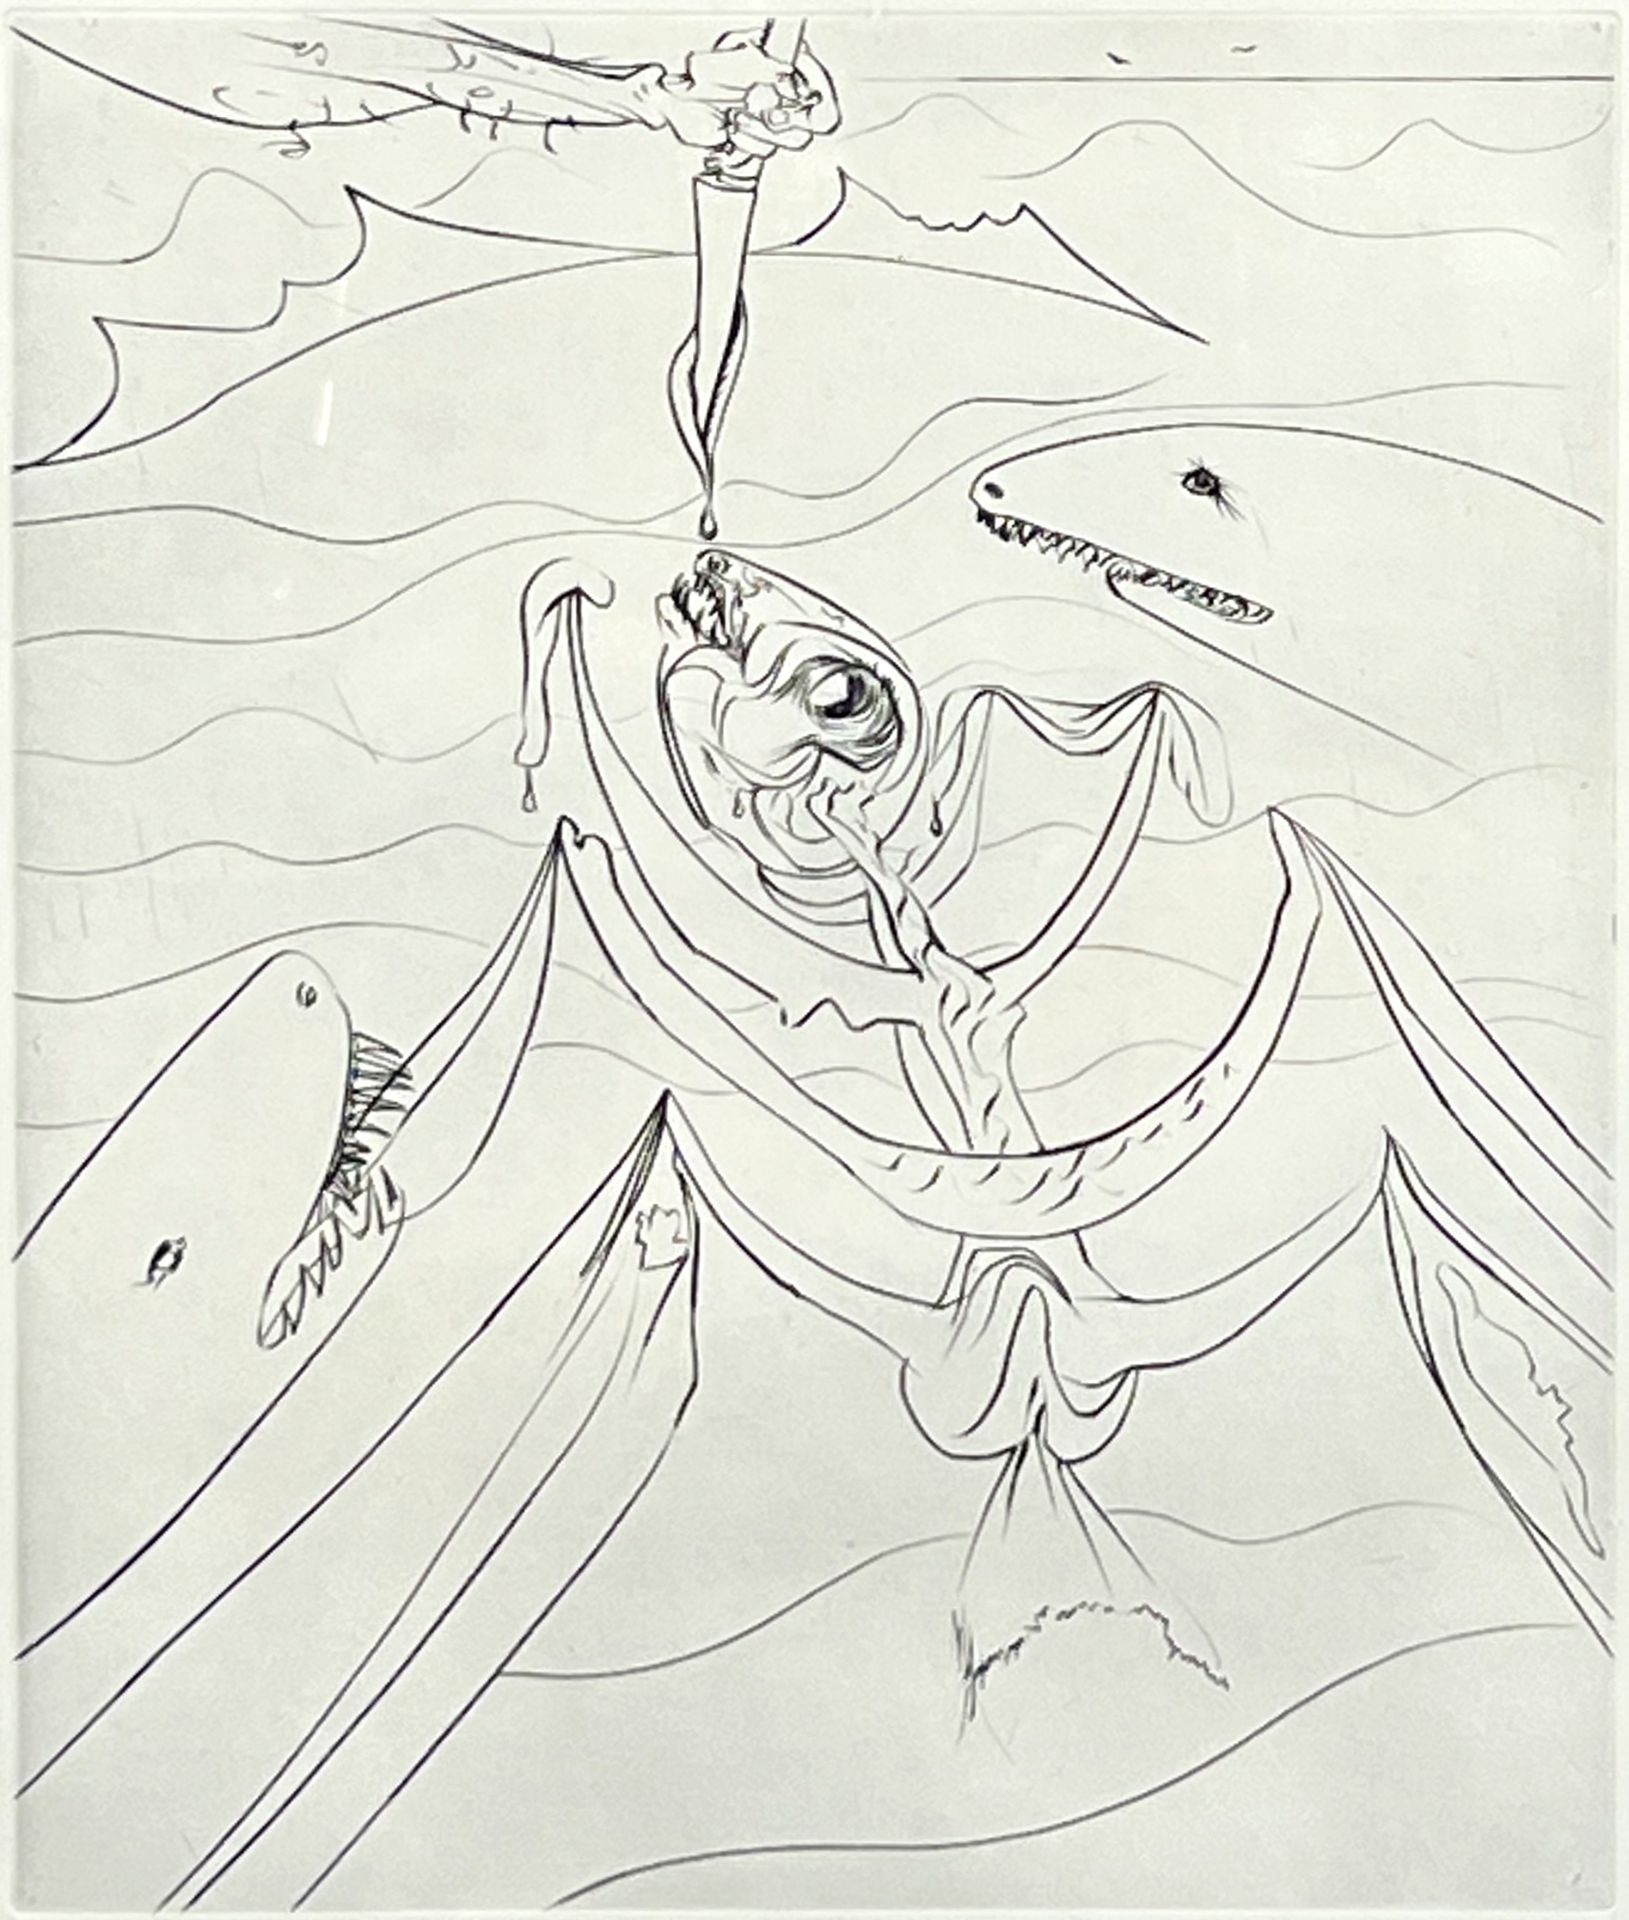 Salvador DALI (1904 - 1989). From the series "Hemingway, E. The old man and the sea". - Image 2 of 10